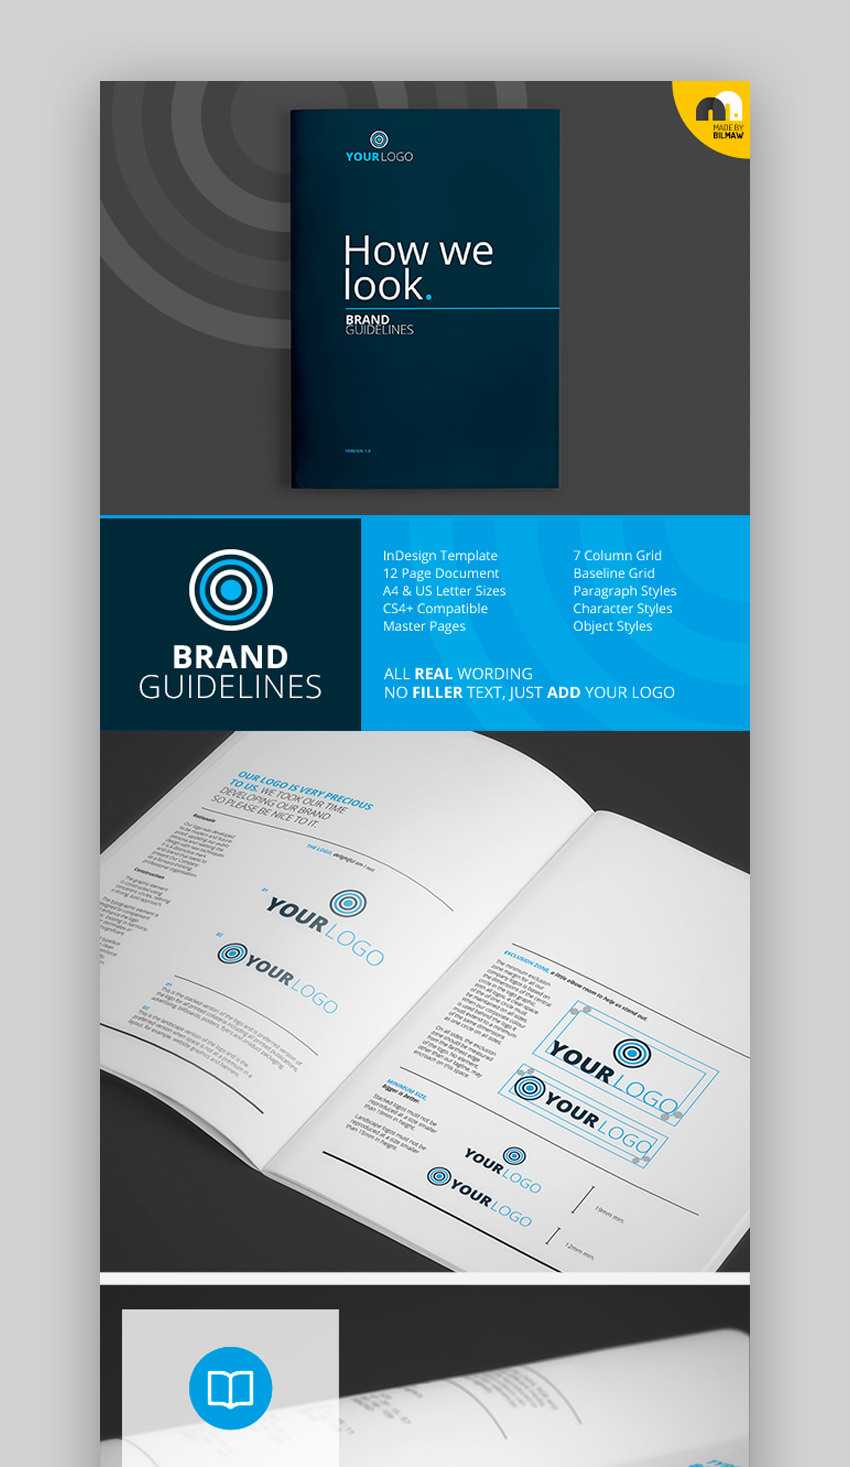 30 Best Indesign Brochure Templates – Creative Business In Indesign Templates Free Download Brochure